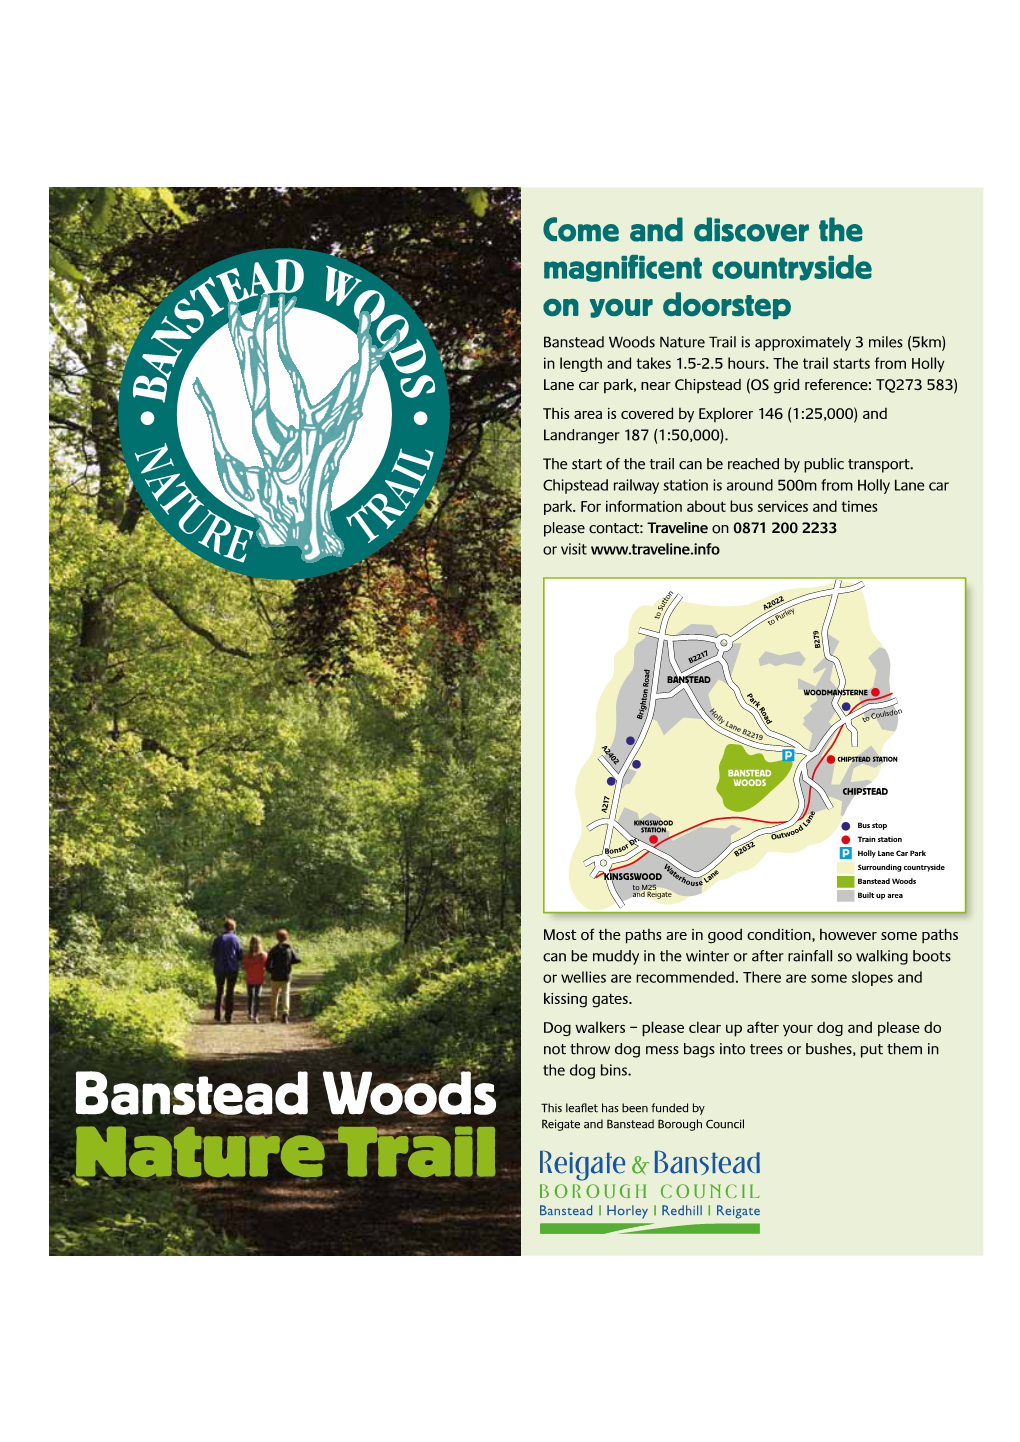 Banstead Woods Nature Trail Is Approximately 3 Miles (5Km) in Length and Takes 1.5-2.5 Hours